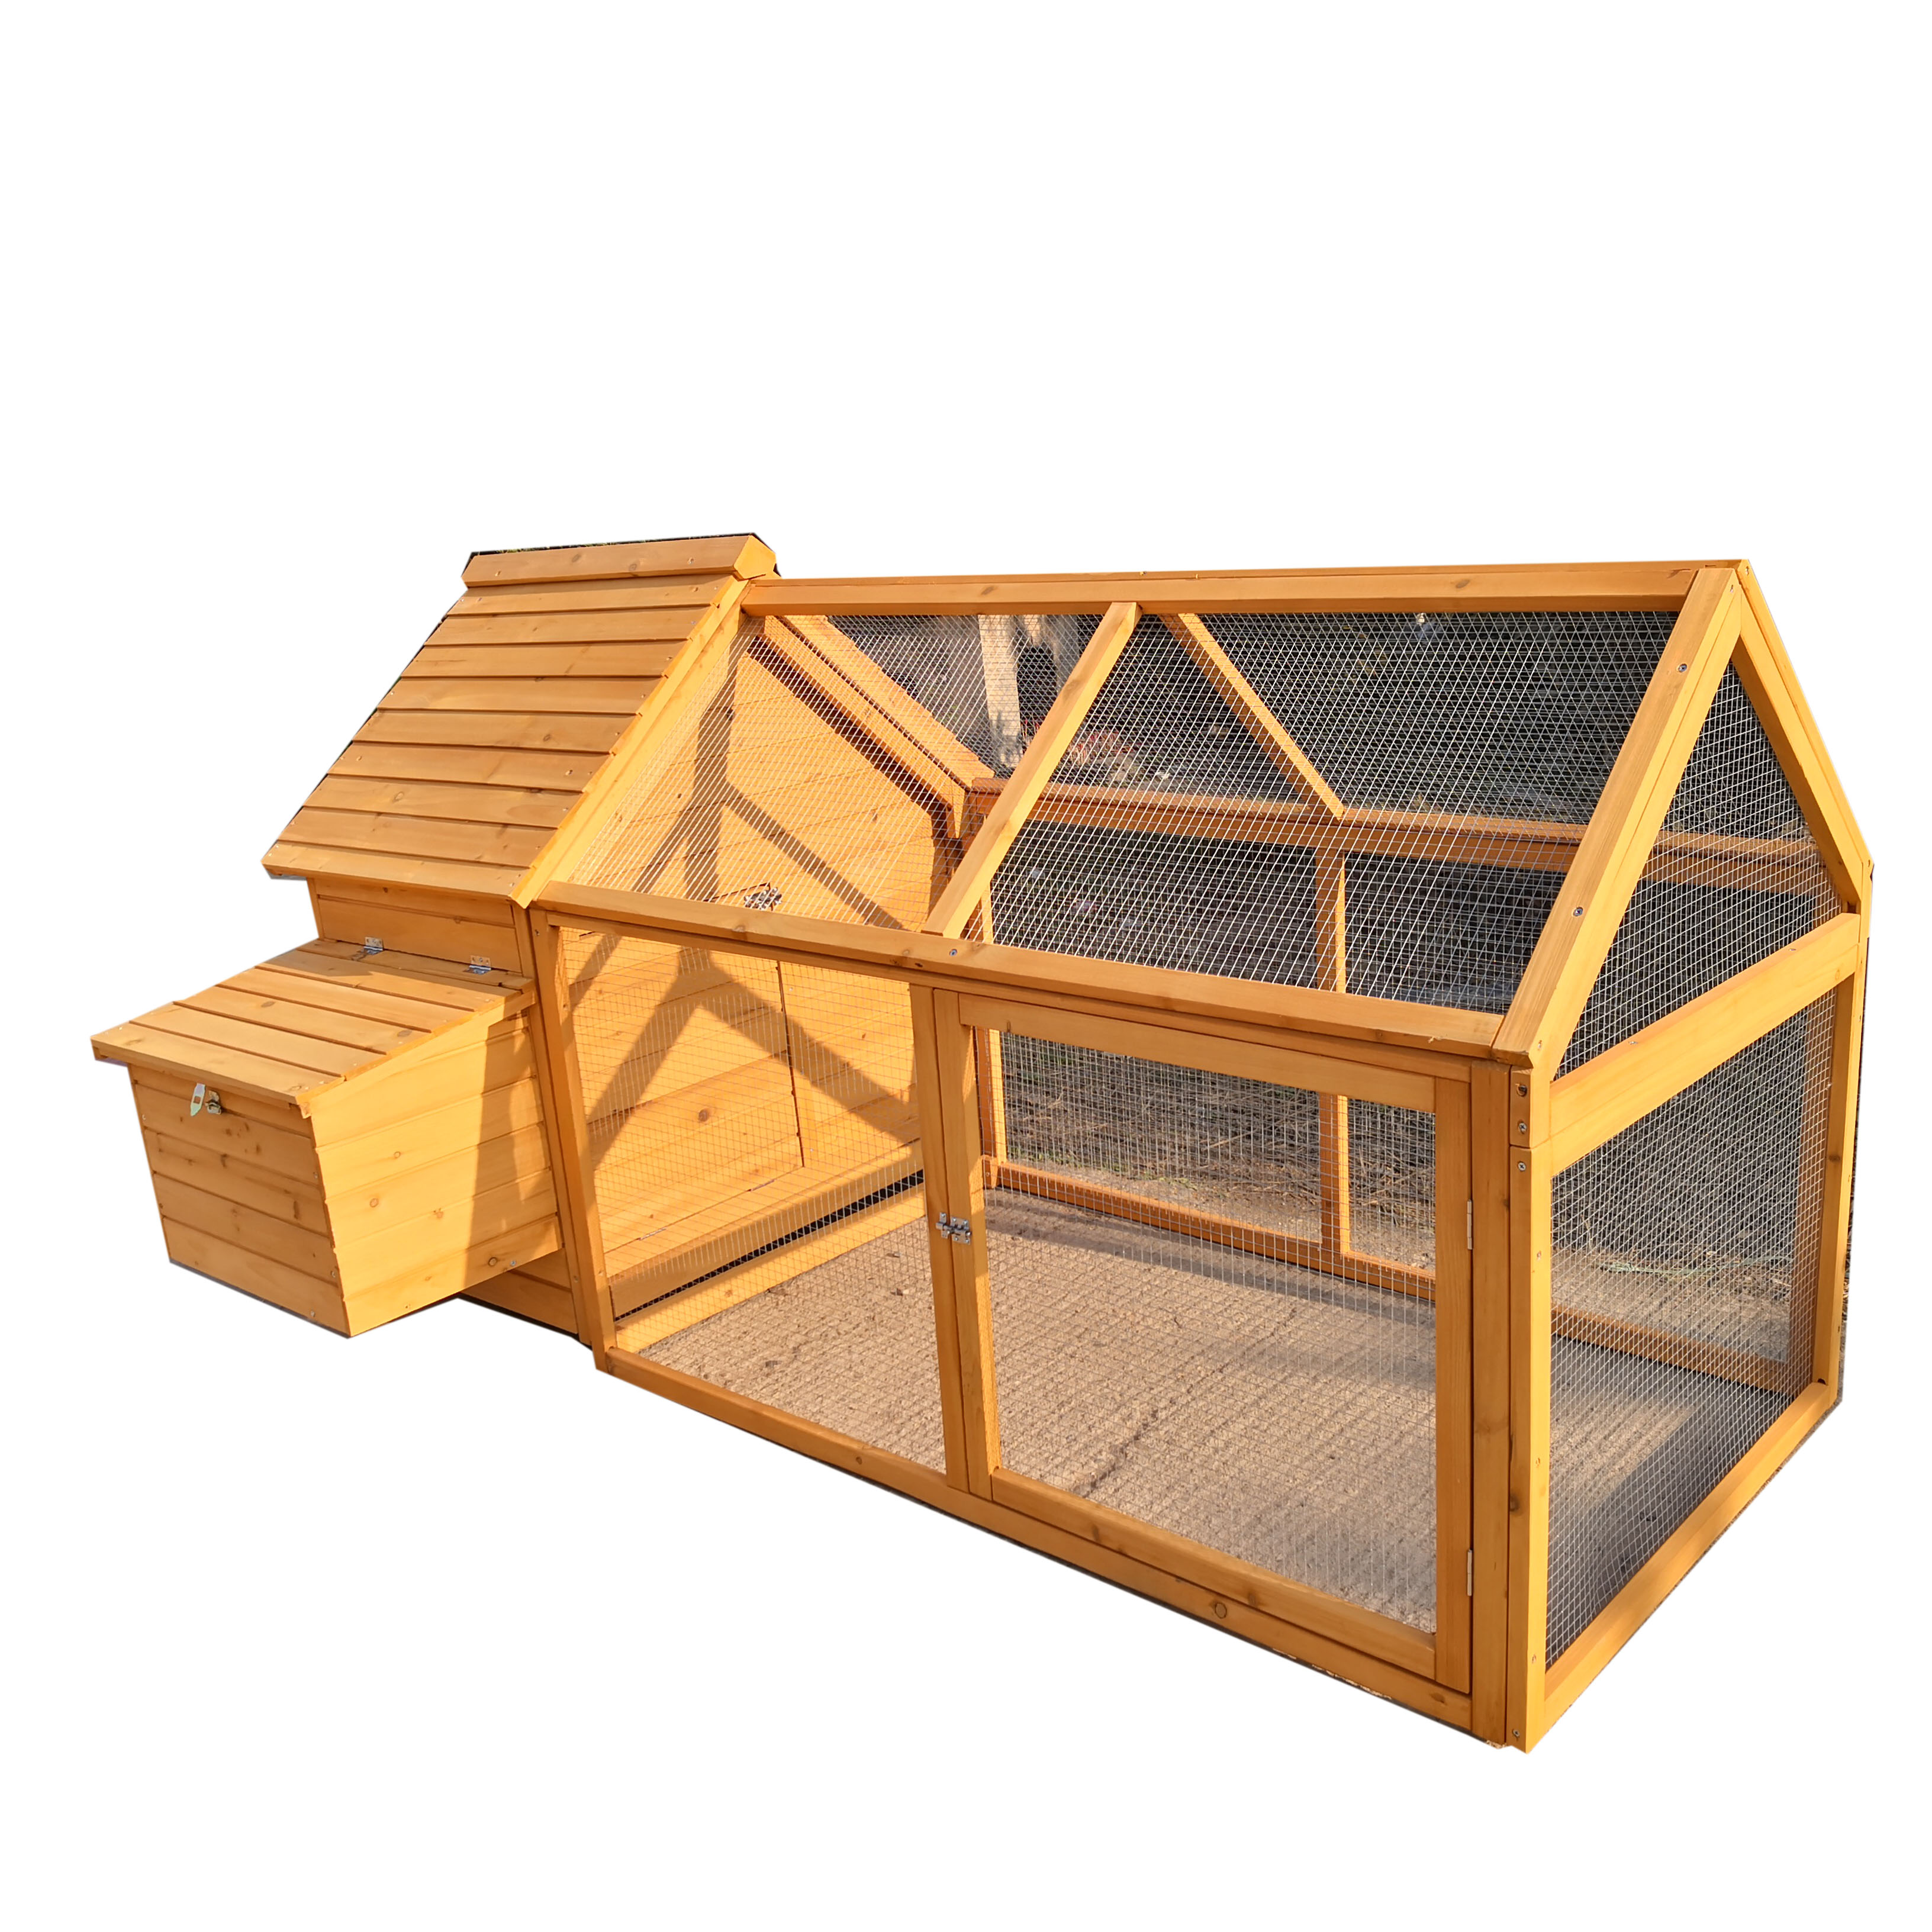 commercial Manufacturer waterproof outdoor backyard large wooden chicken coop hen laying Poultry House Featured Image